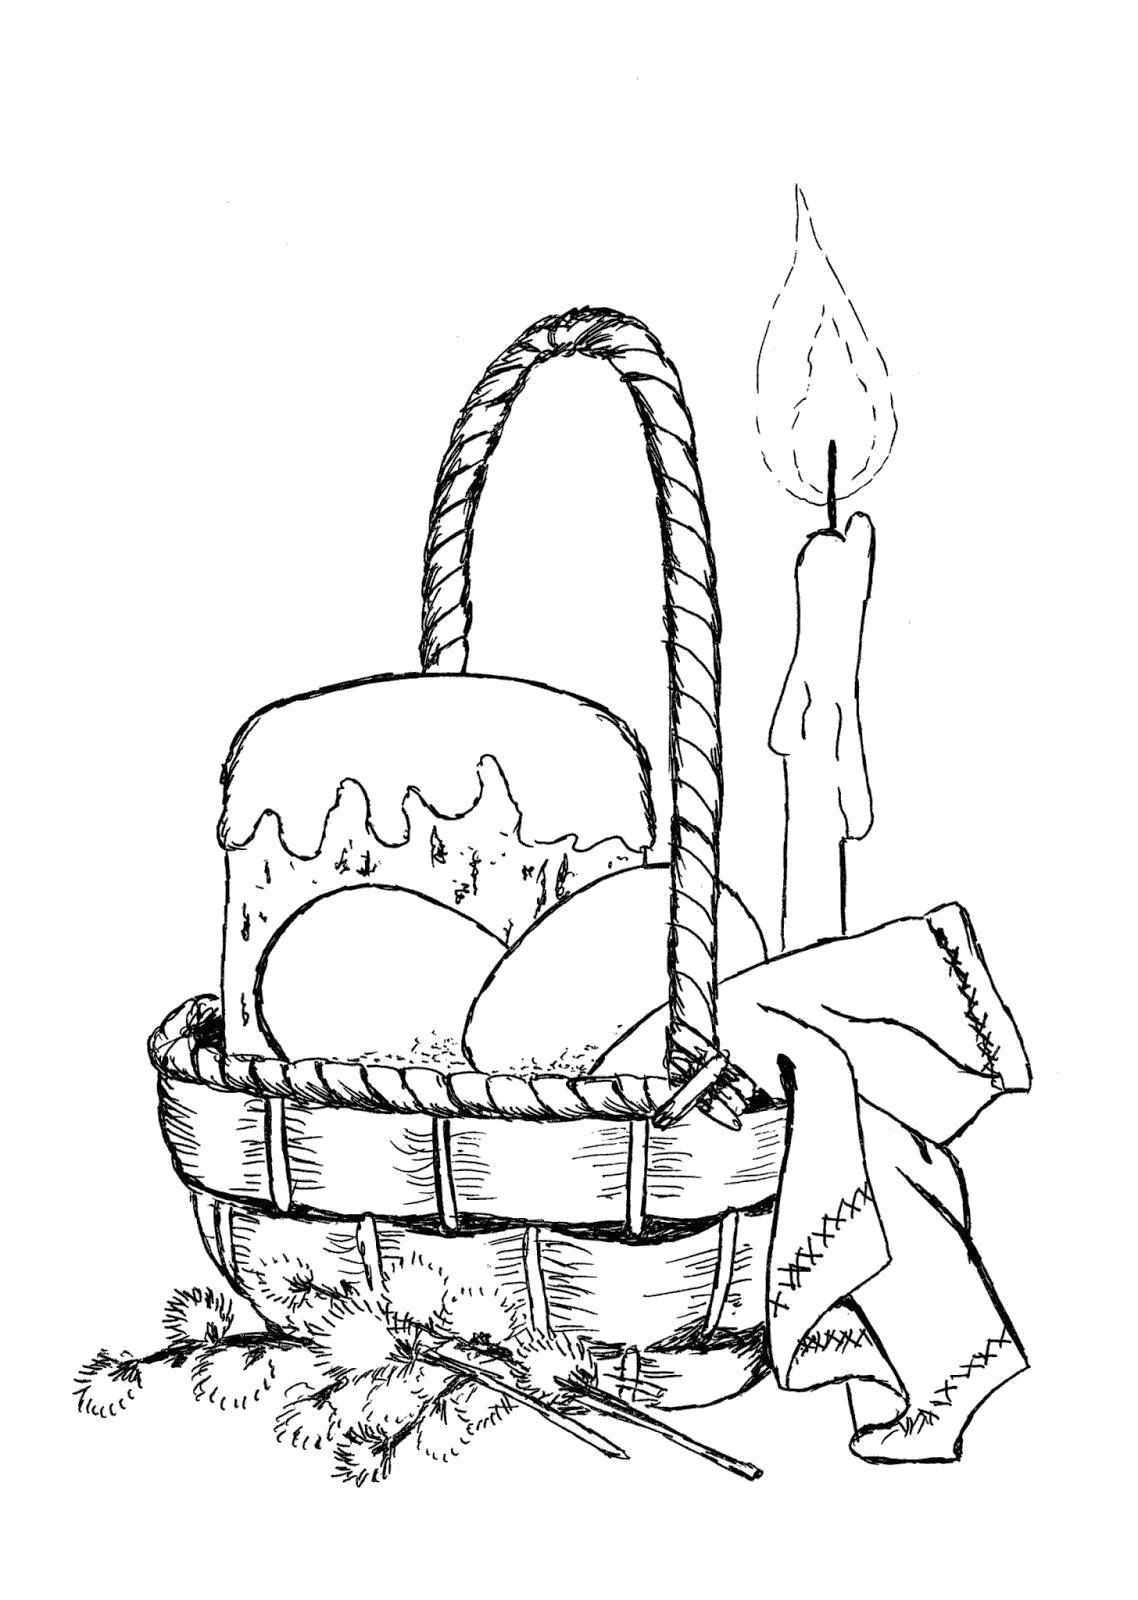 Coloring Easter basket. Category Easter eggs. Tags:  Easter, eggs, patterns.